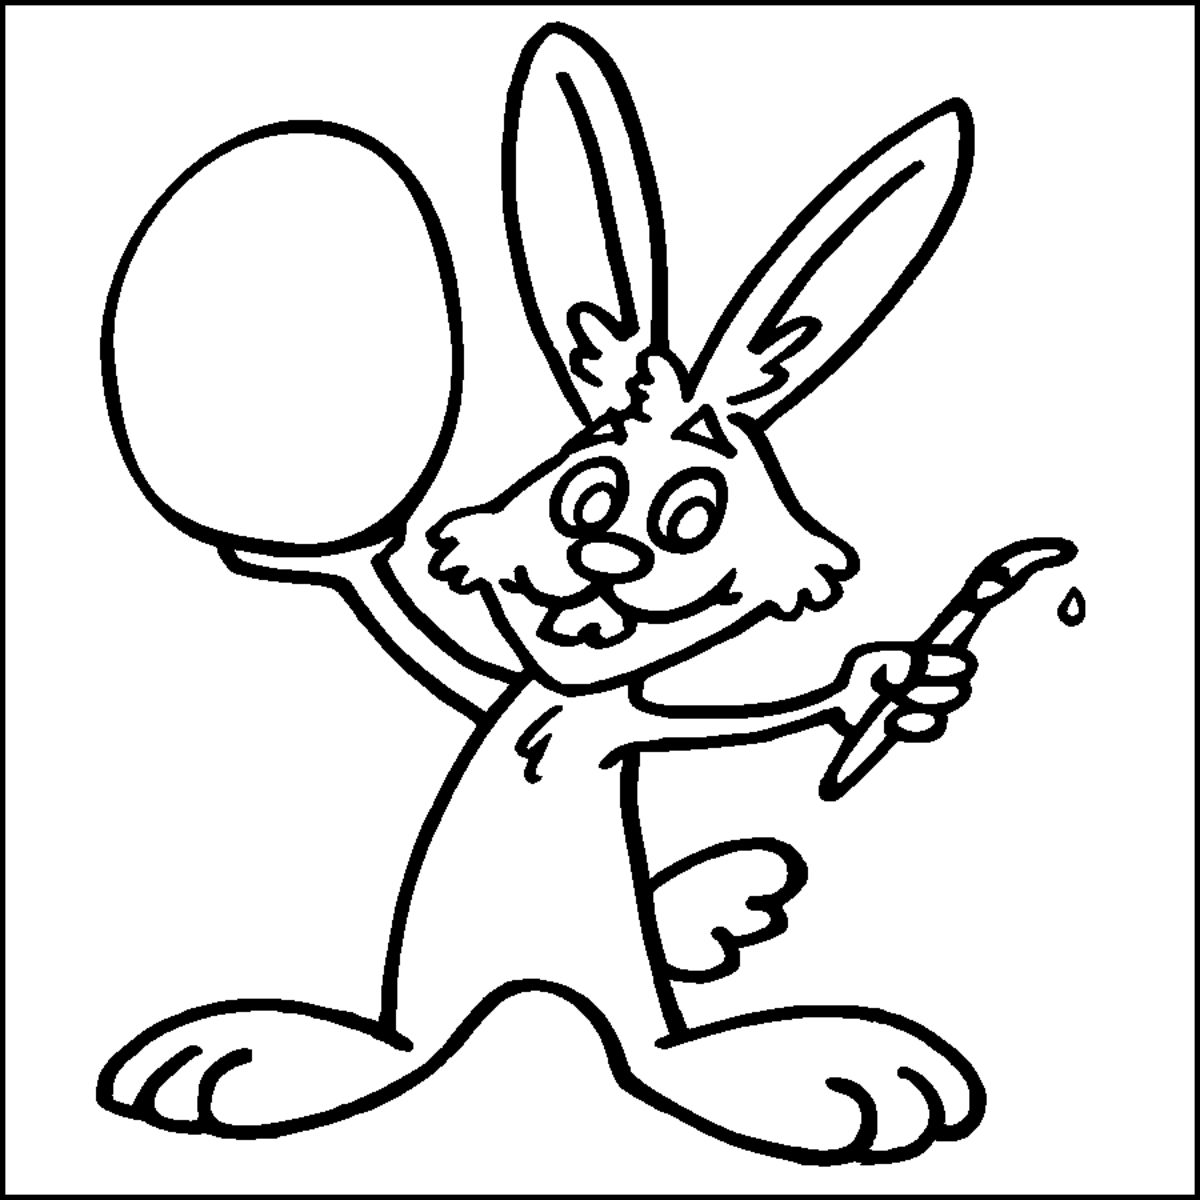 Bunny Painter Coloring Page